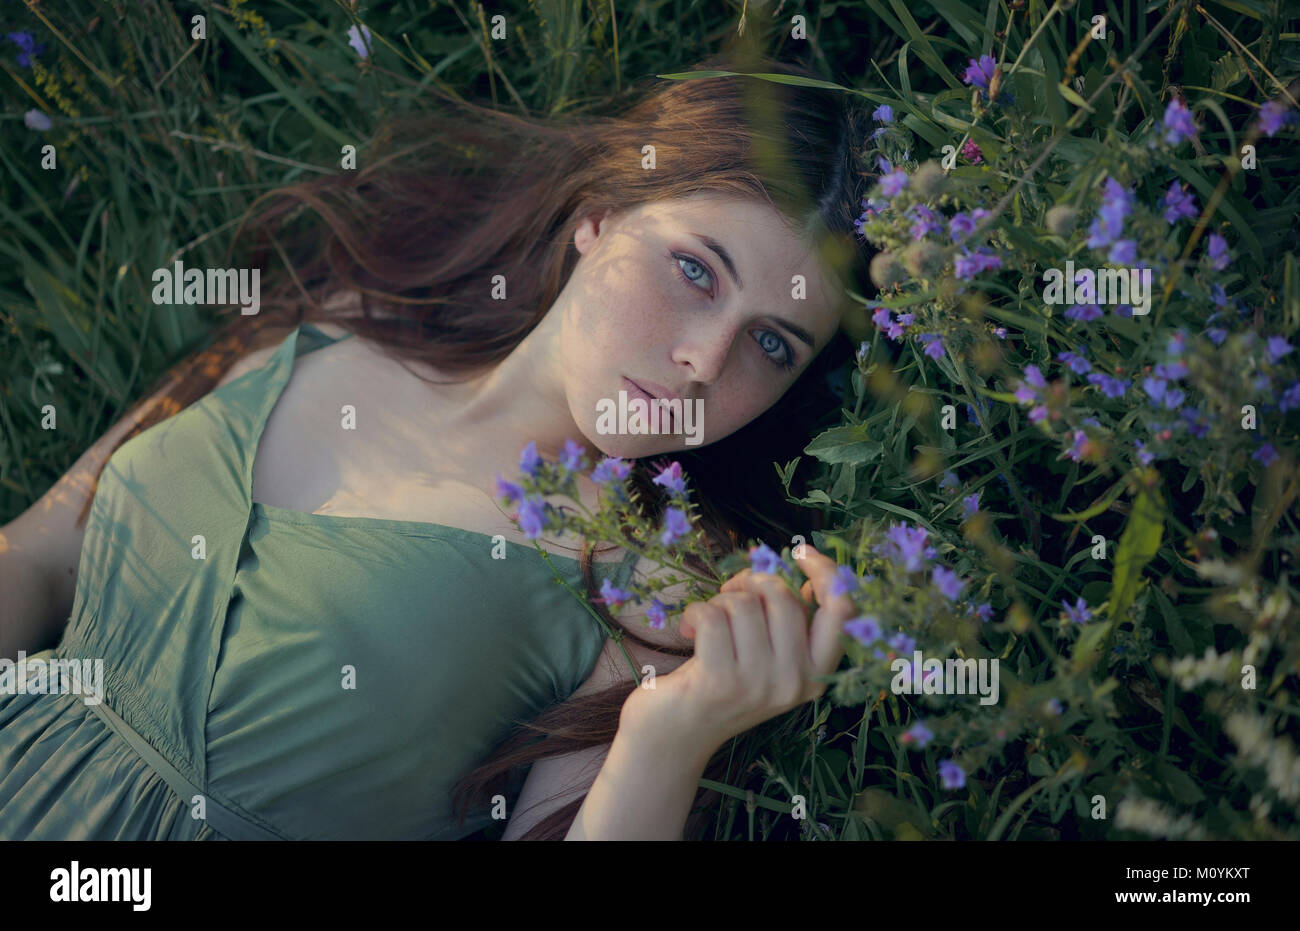 Caucasian woman laying in grass avec wildflowers Banque D'Images